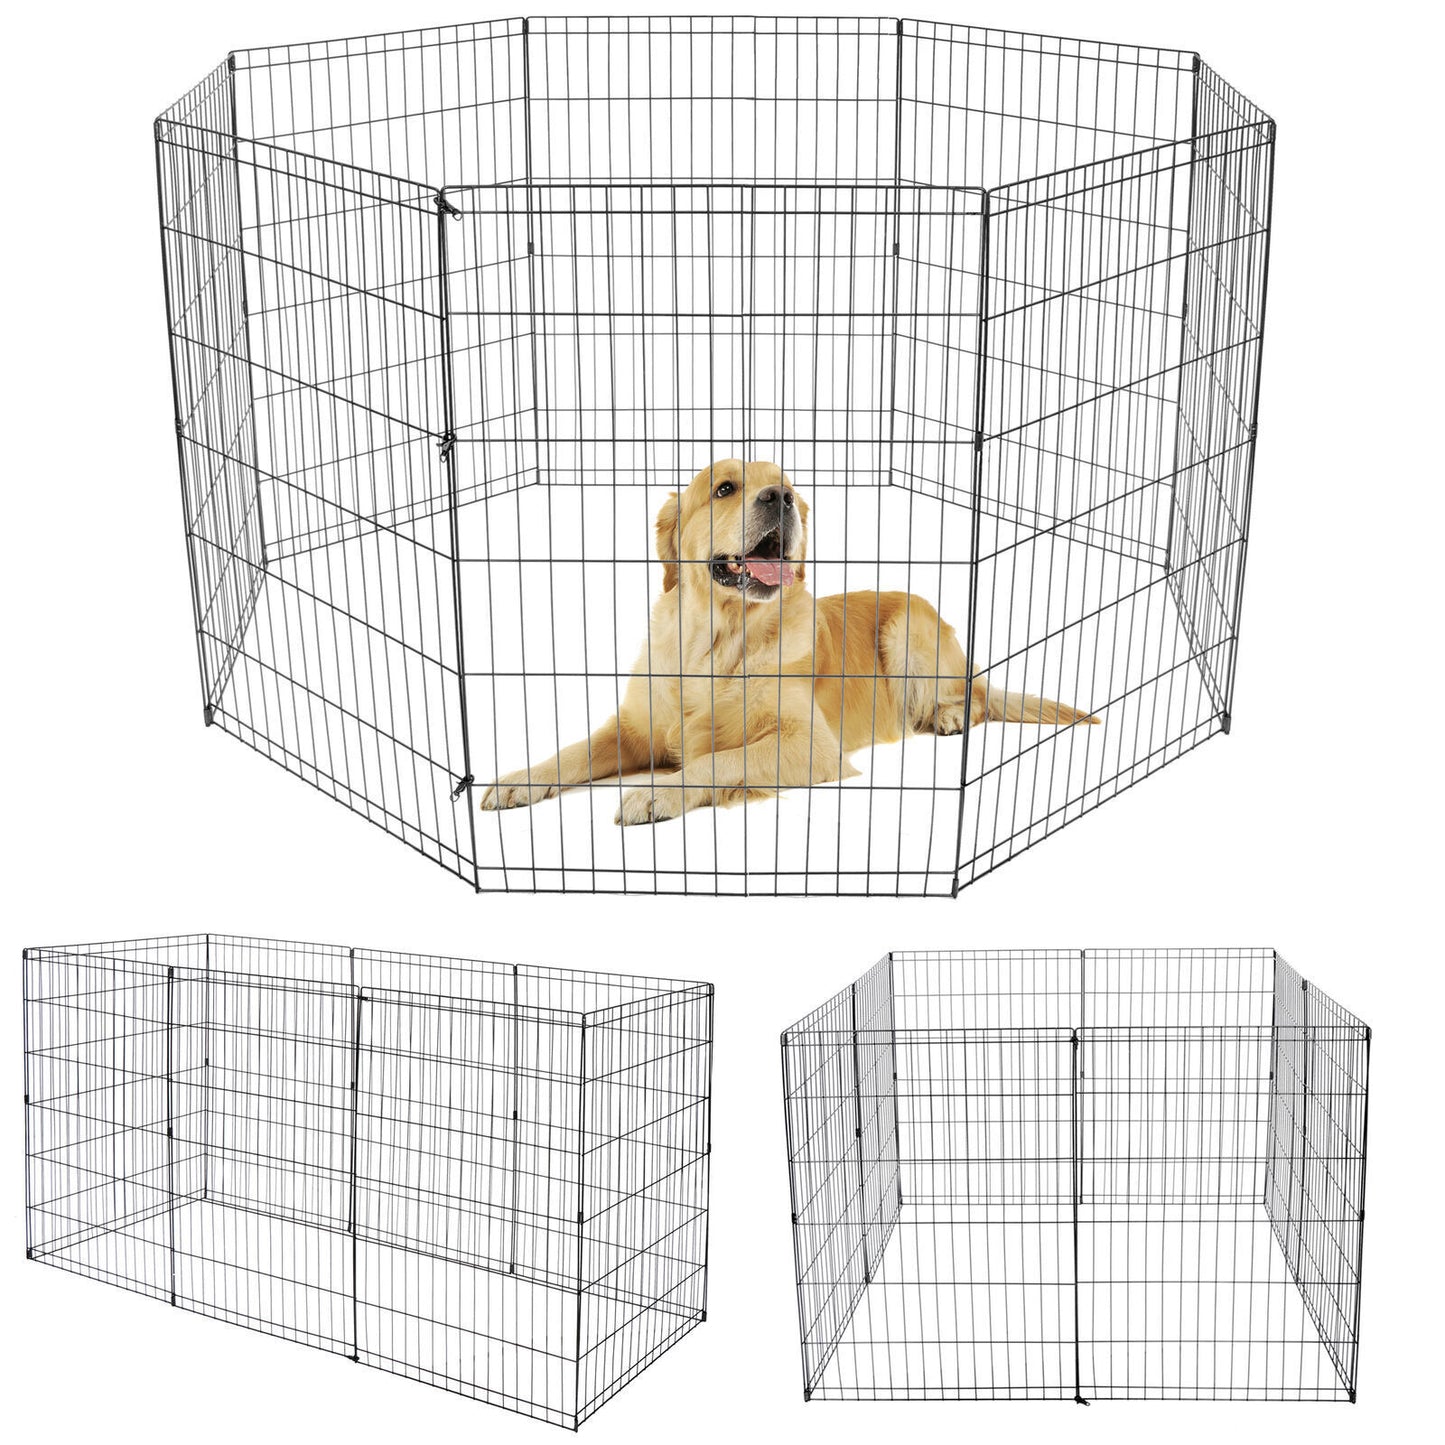 36" 8 Panels Pet Play Pen Dog Playpen Cage Large Crate Exercise Fence In/Outdoor